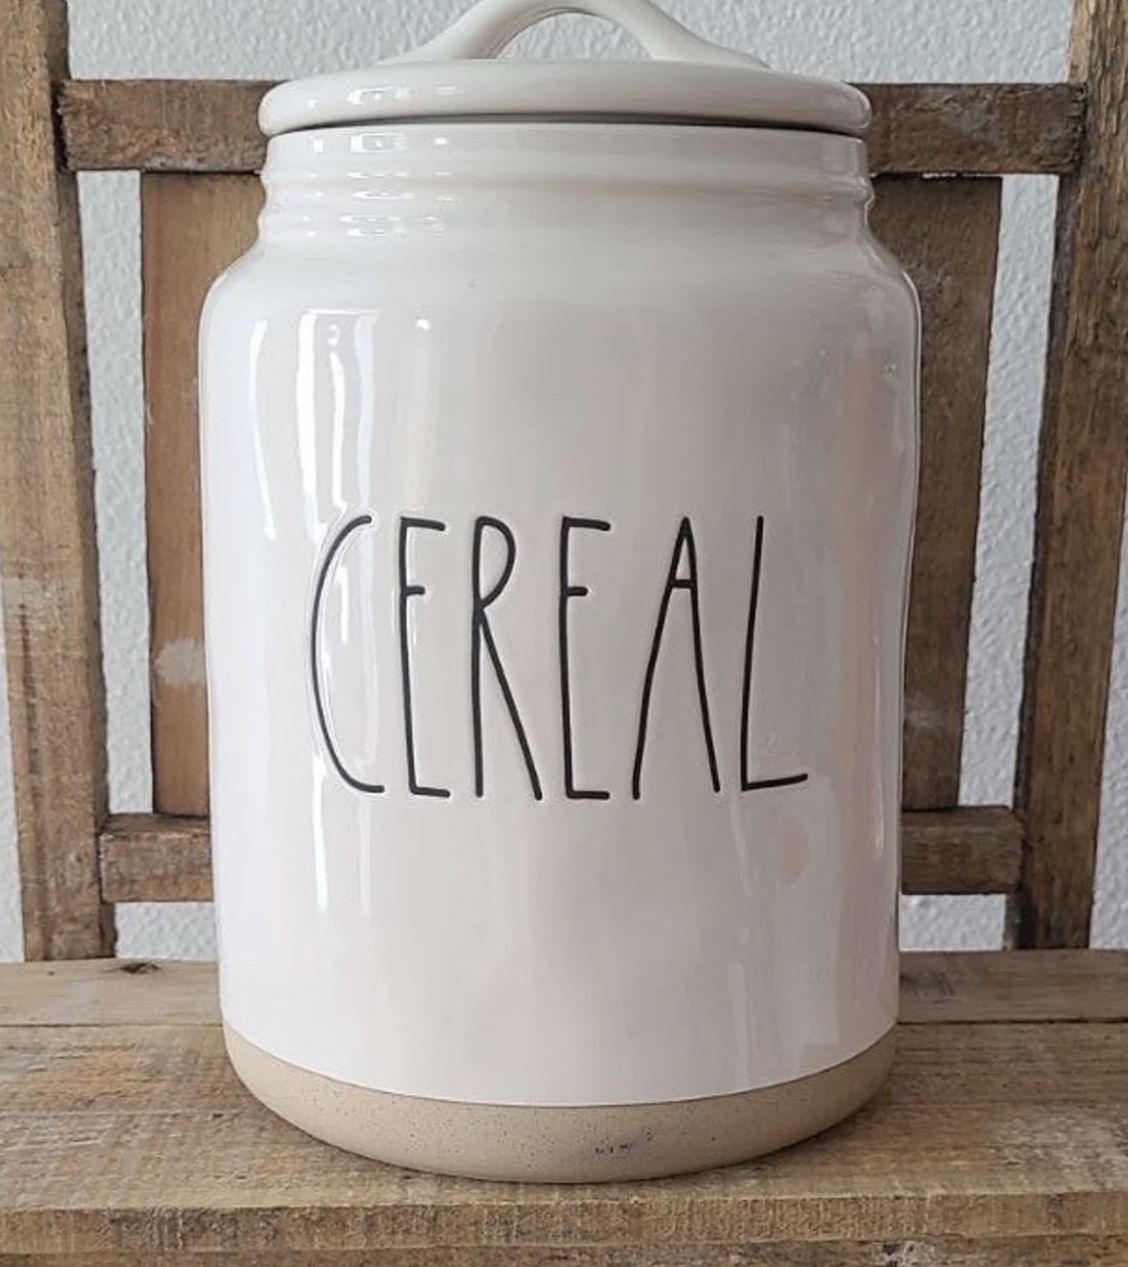 Rae Dunn Cereal Ceramic Canister- New